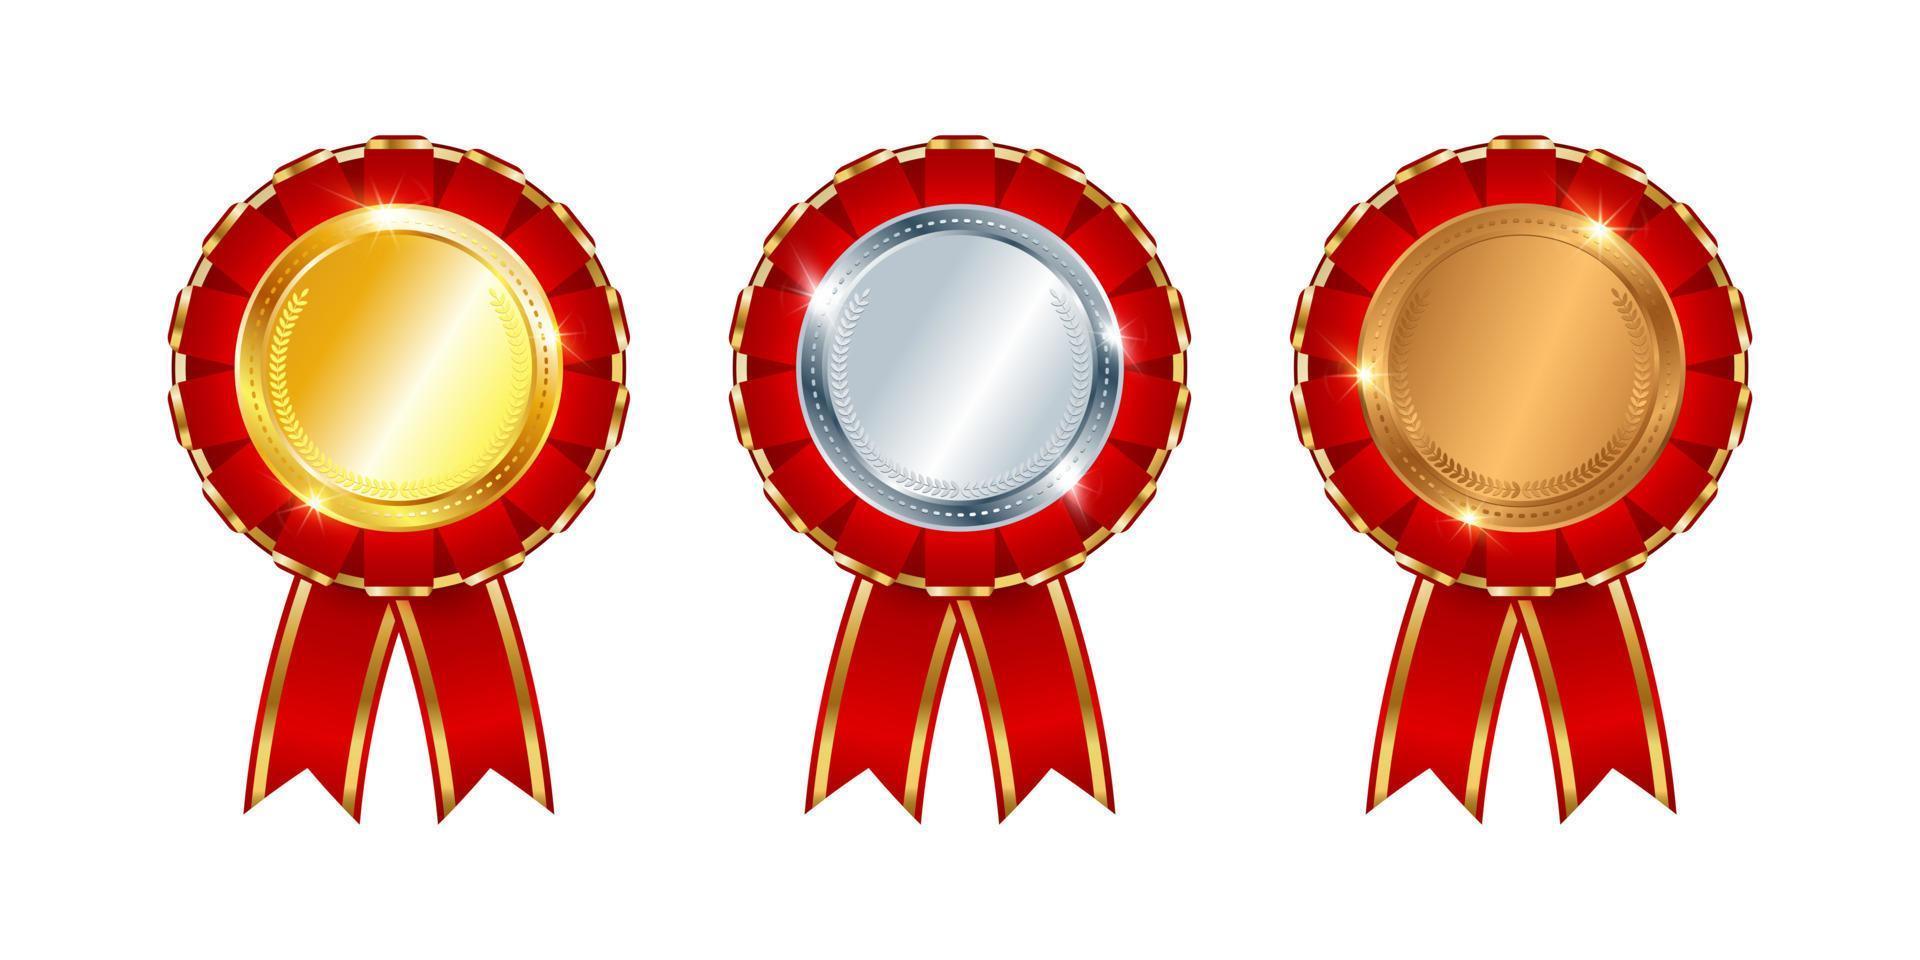 Set of gold, silver, bronze medals with red ribbon. 3d insignia decorated with folds of red ribbon. Achievement award. Vector illustration.